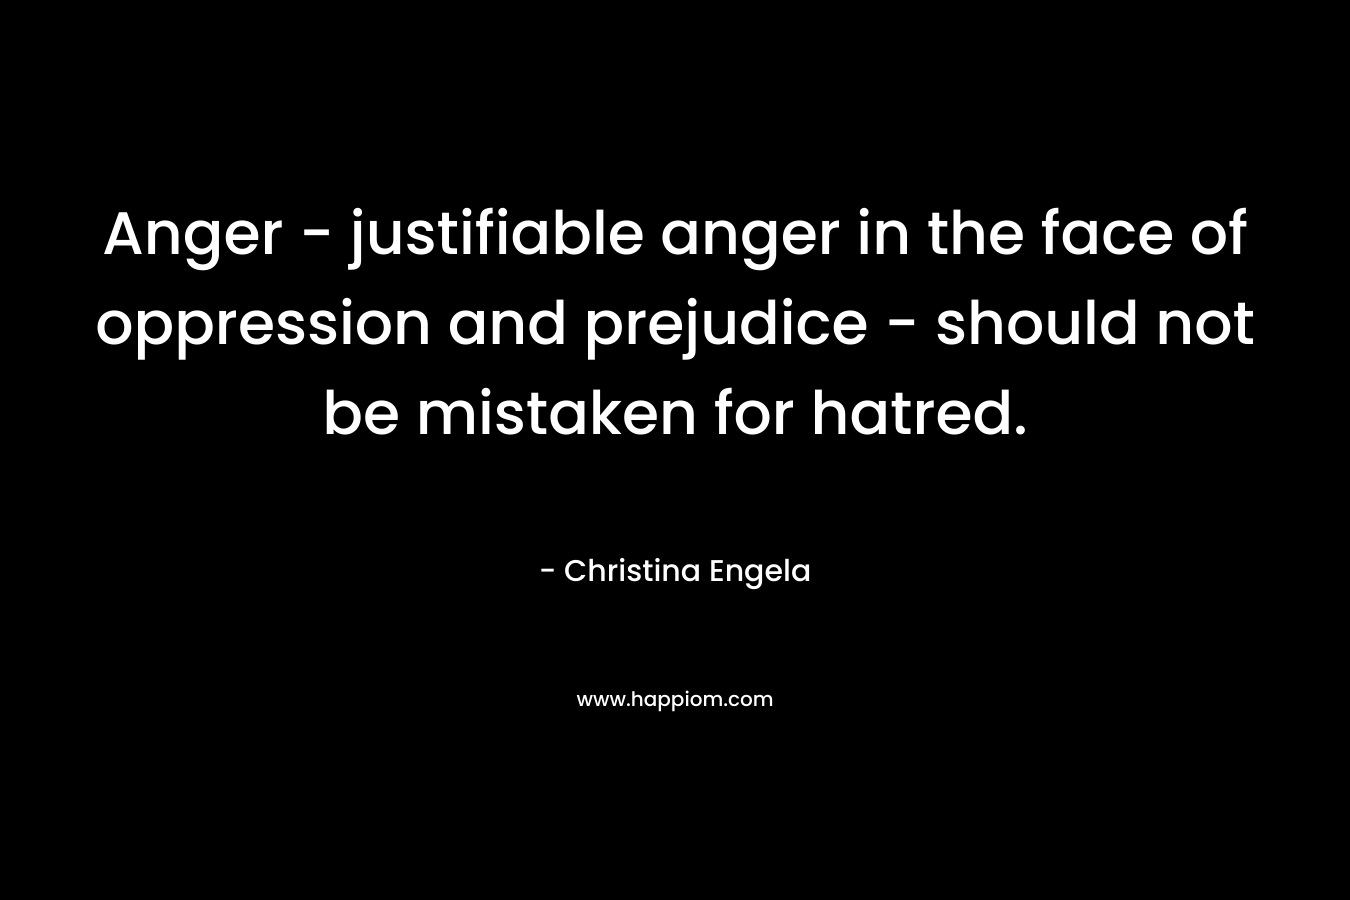 Anger - justifiable anger in the face of oppression and prejudice - should not be mistaken for hatred.